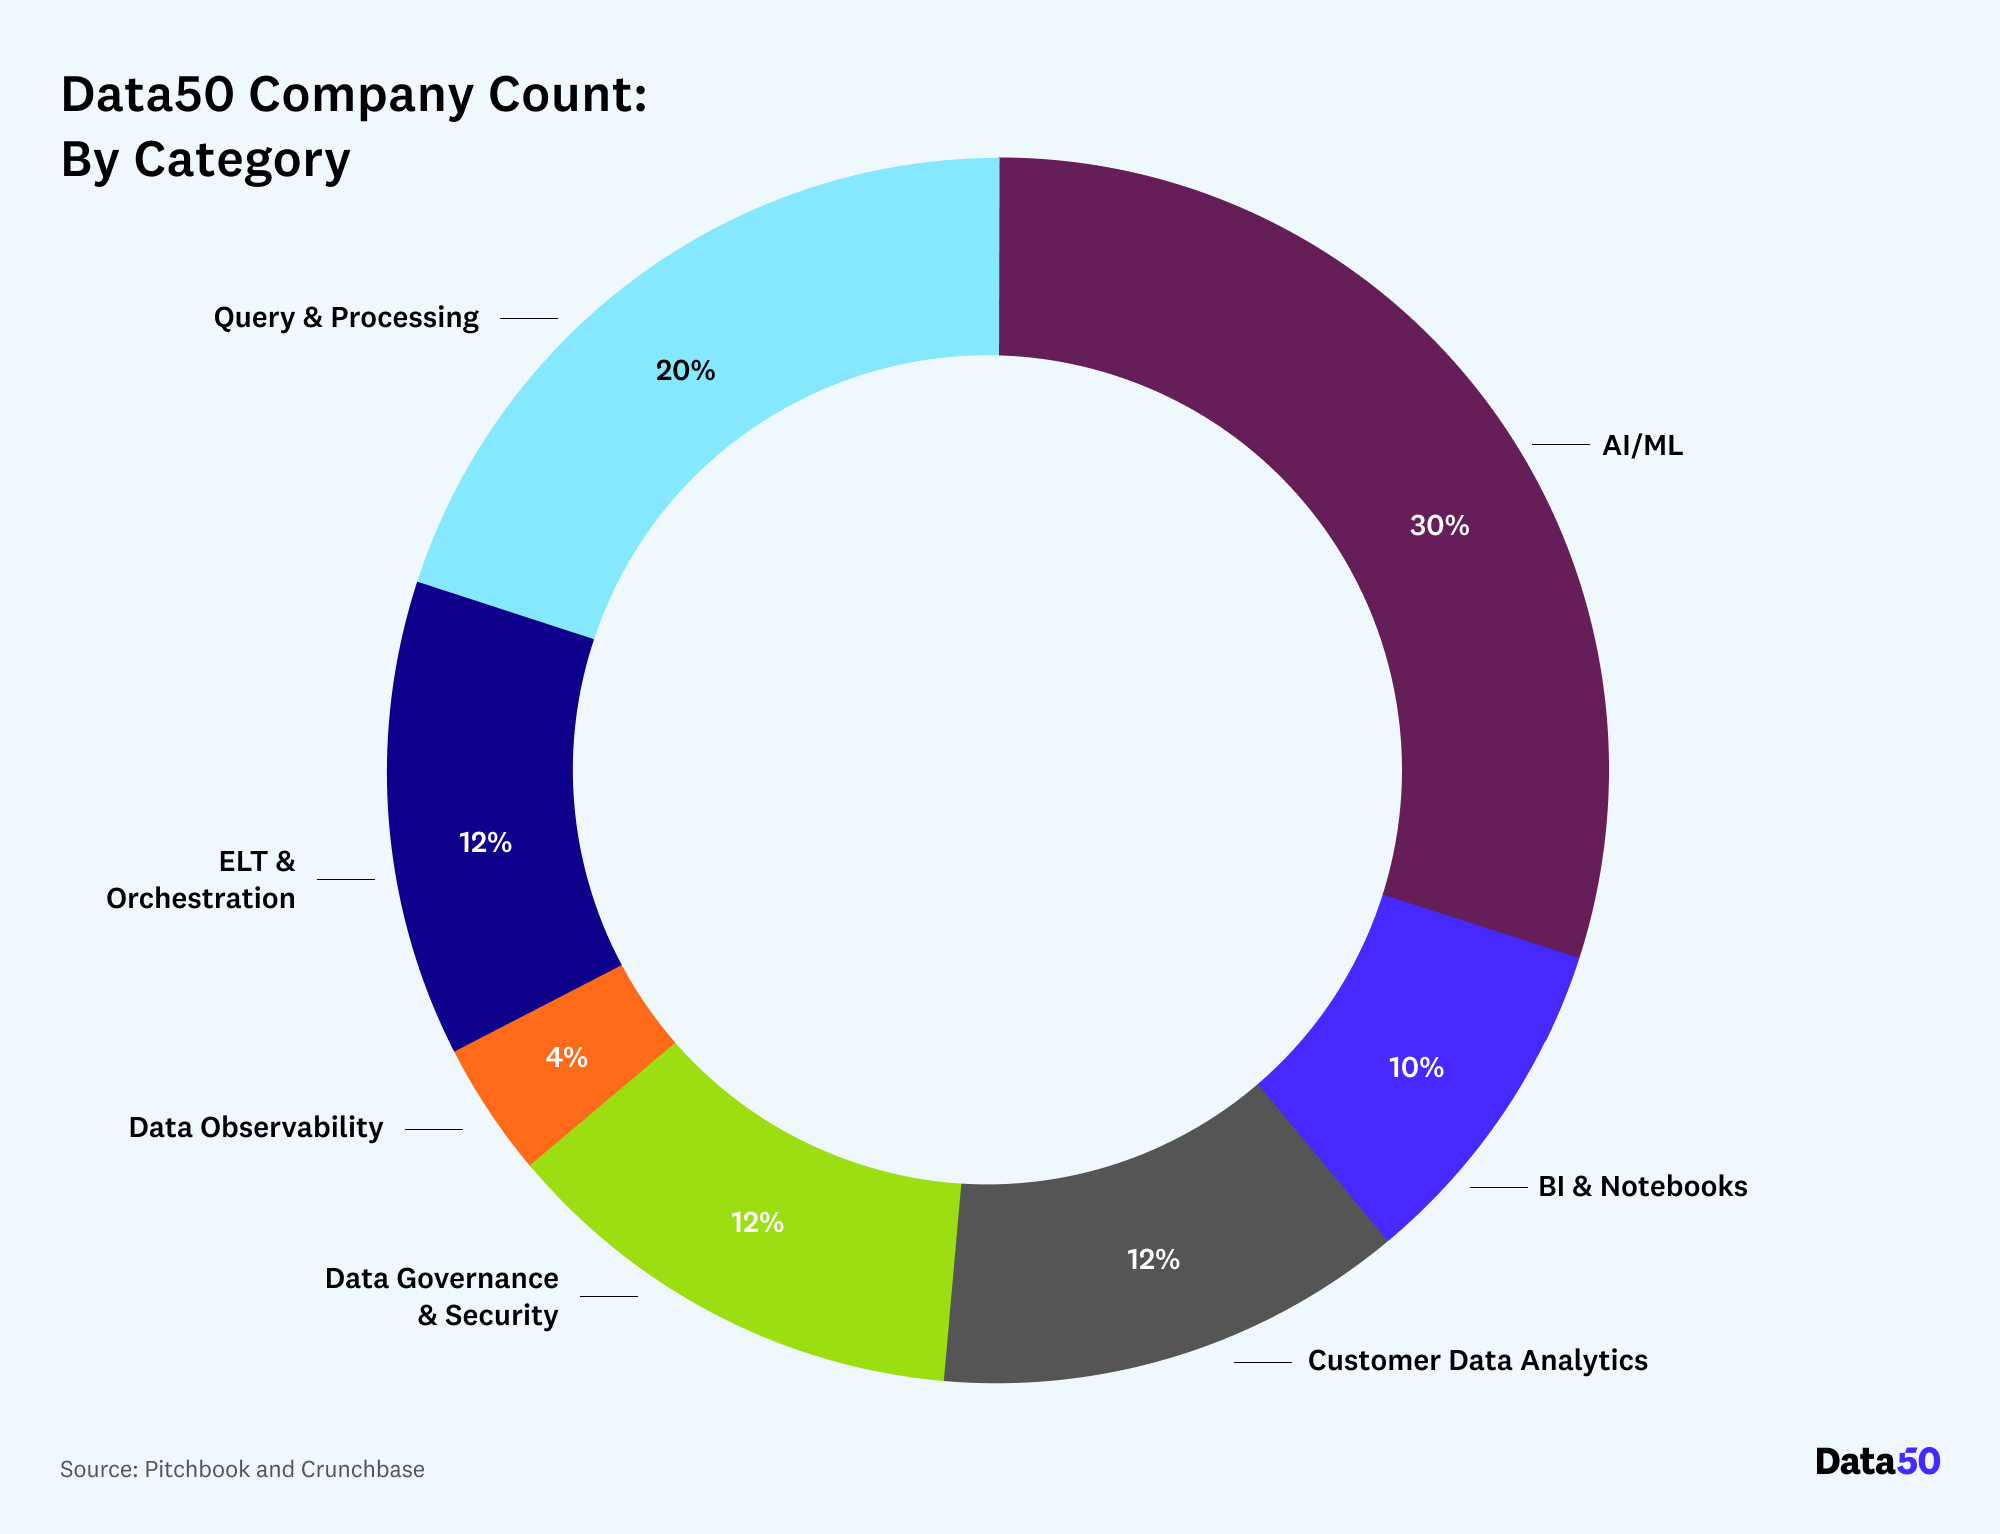 Company Count by Category